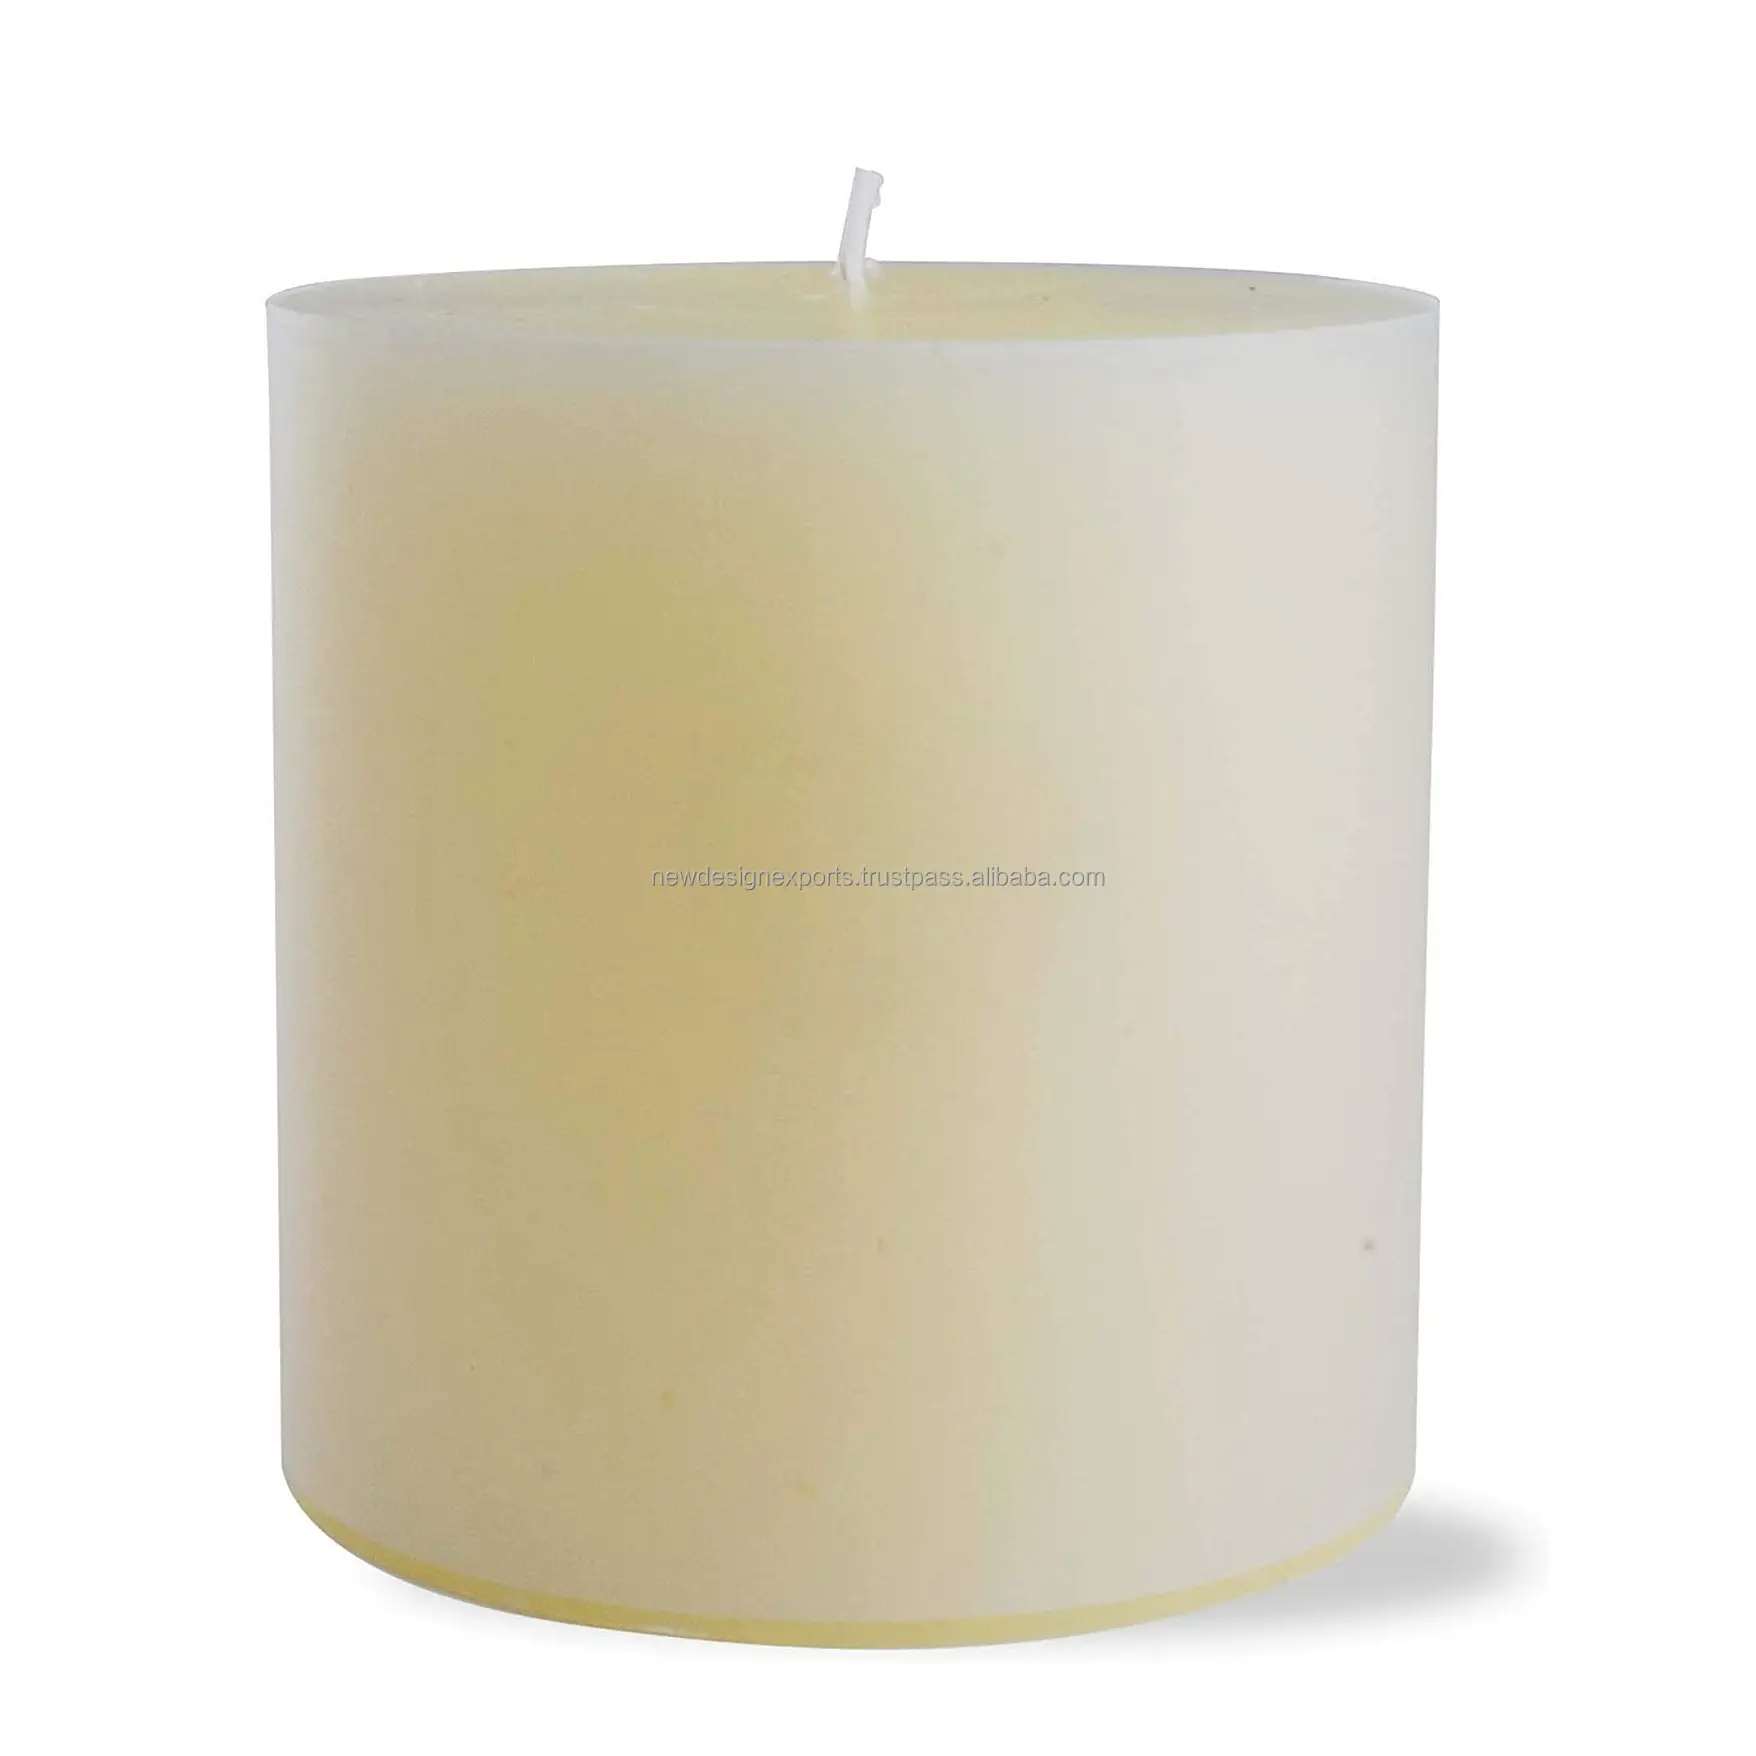 4x4 Ivory Pillar Candle Unscented Drip-free Long Burning Hours for Home Decor Wedding Parties